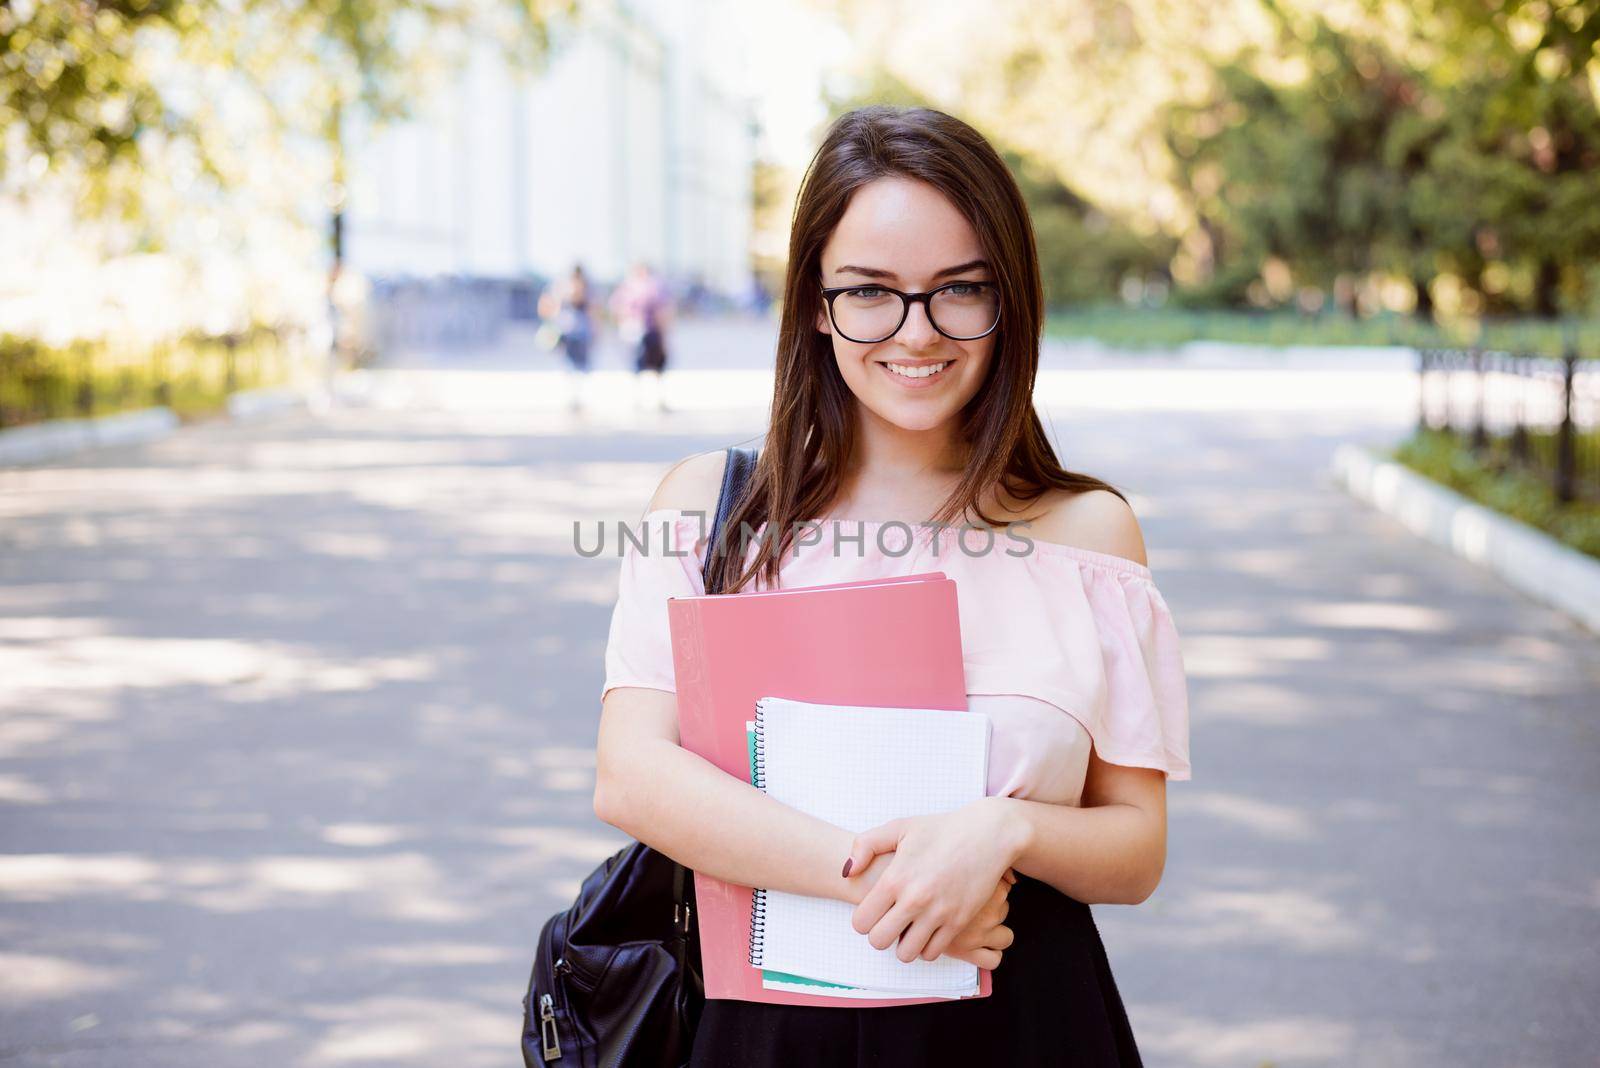 Cheerful girl student with books and notes goes from university after classes happy to have good day of studying